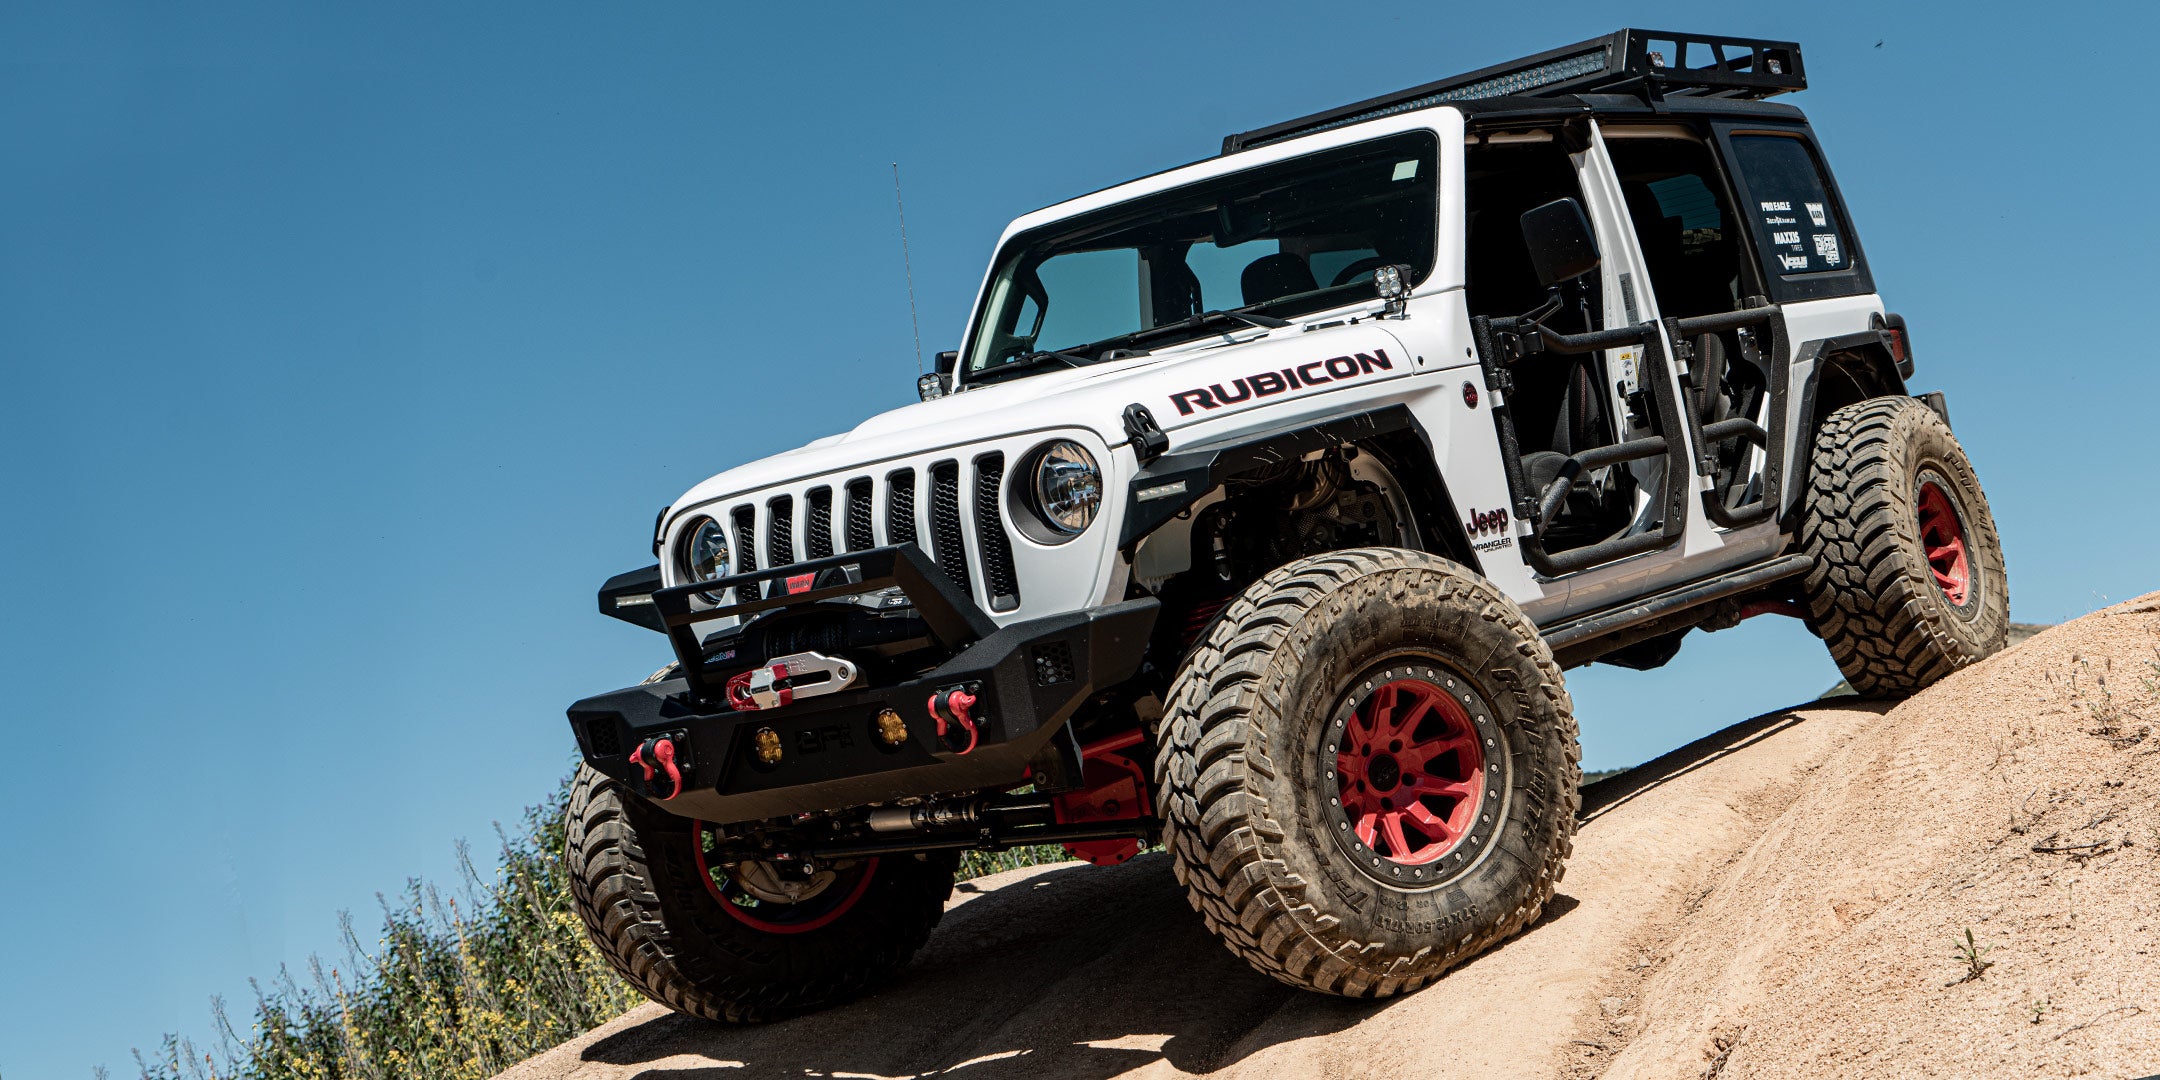 Body Armor 4x4 jeep accessories including bumpers, doors, racks, and more.